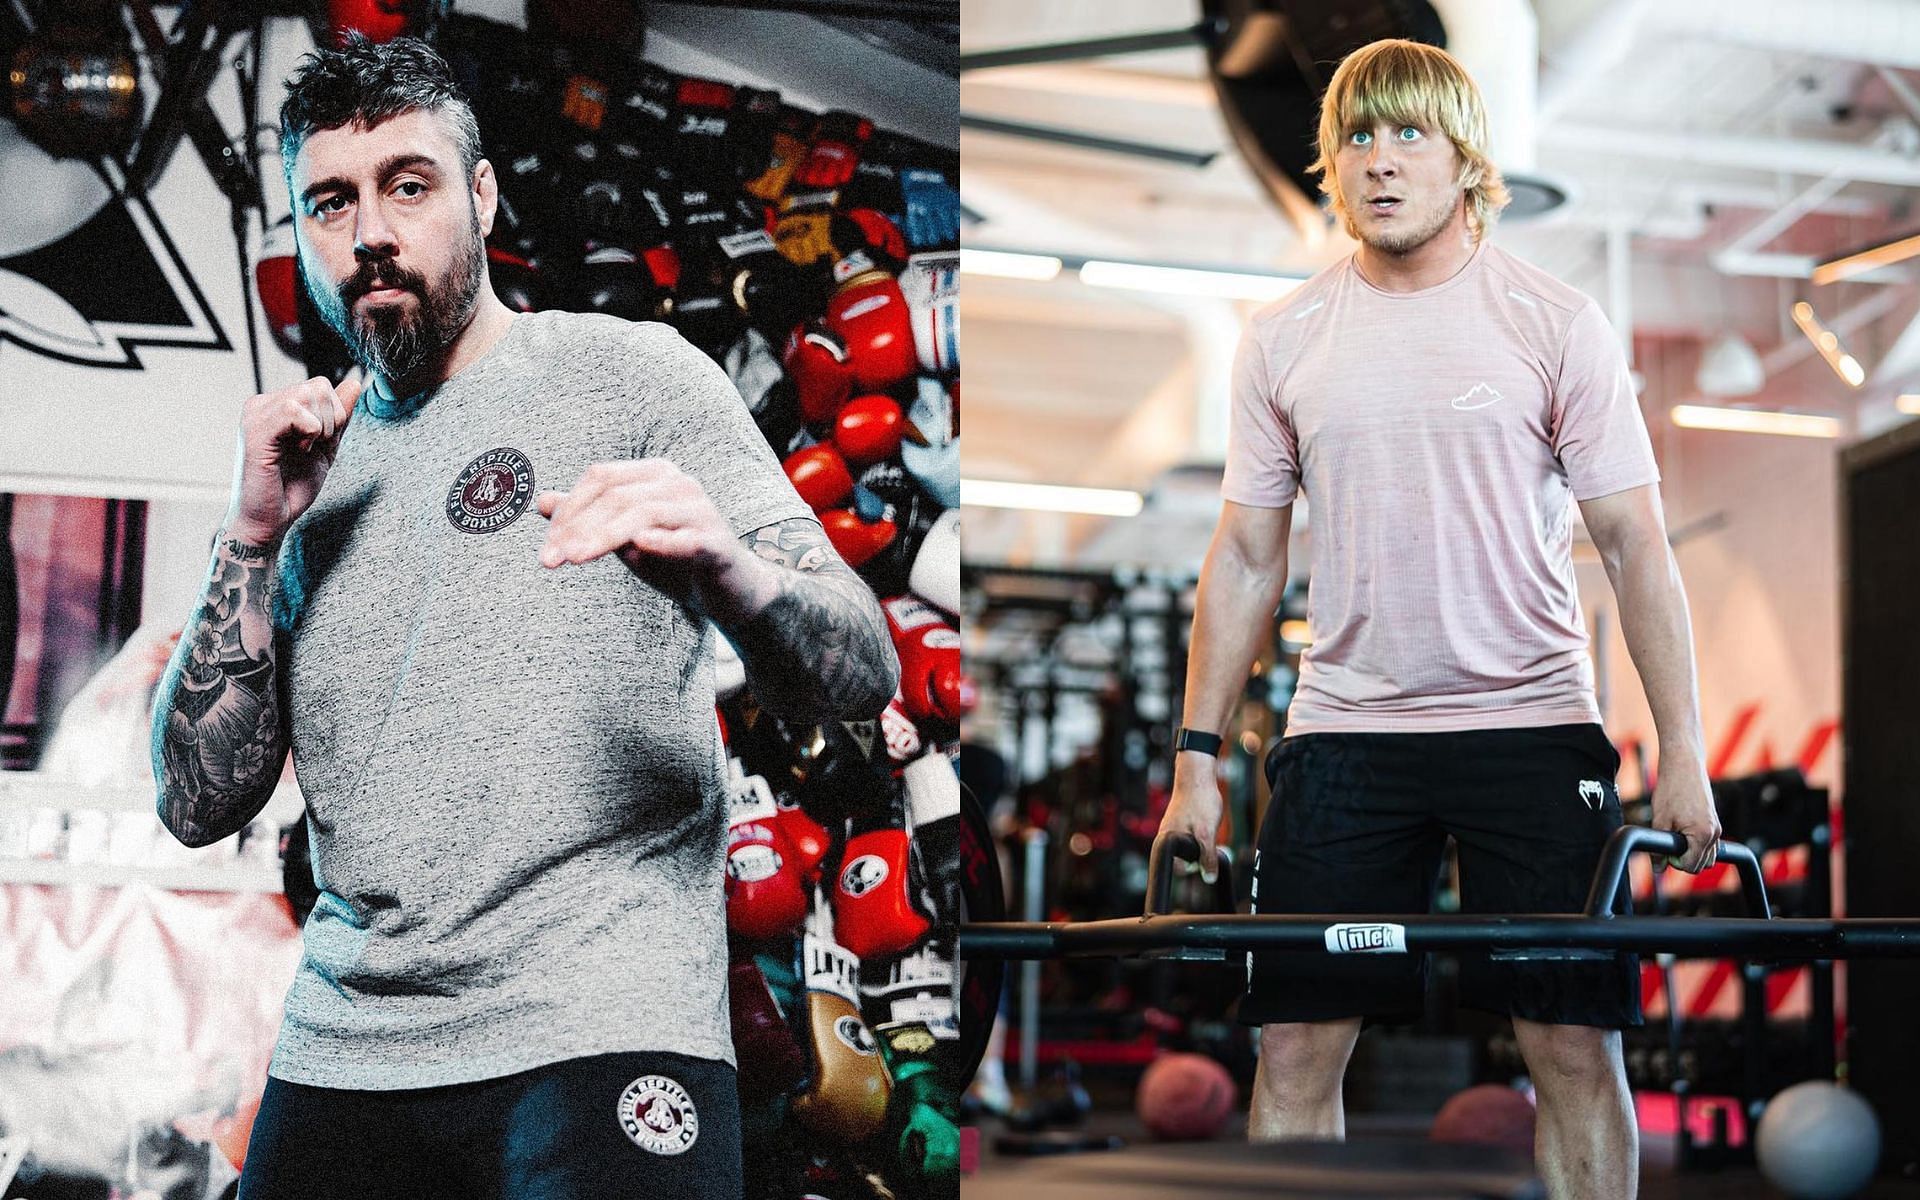 Hardy and Pimblett (left and right; images courtesy of @danhardymma and @theufcbaddy Instagram)